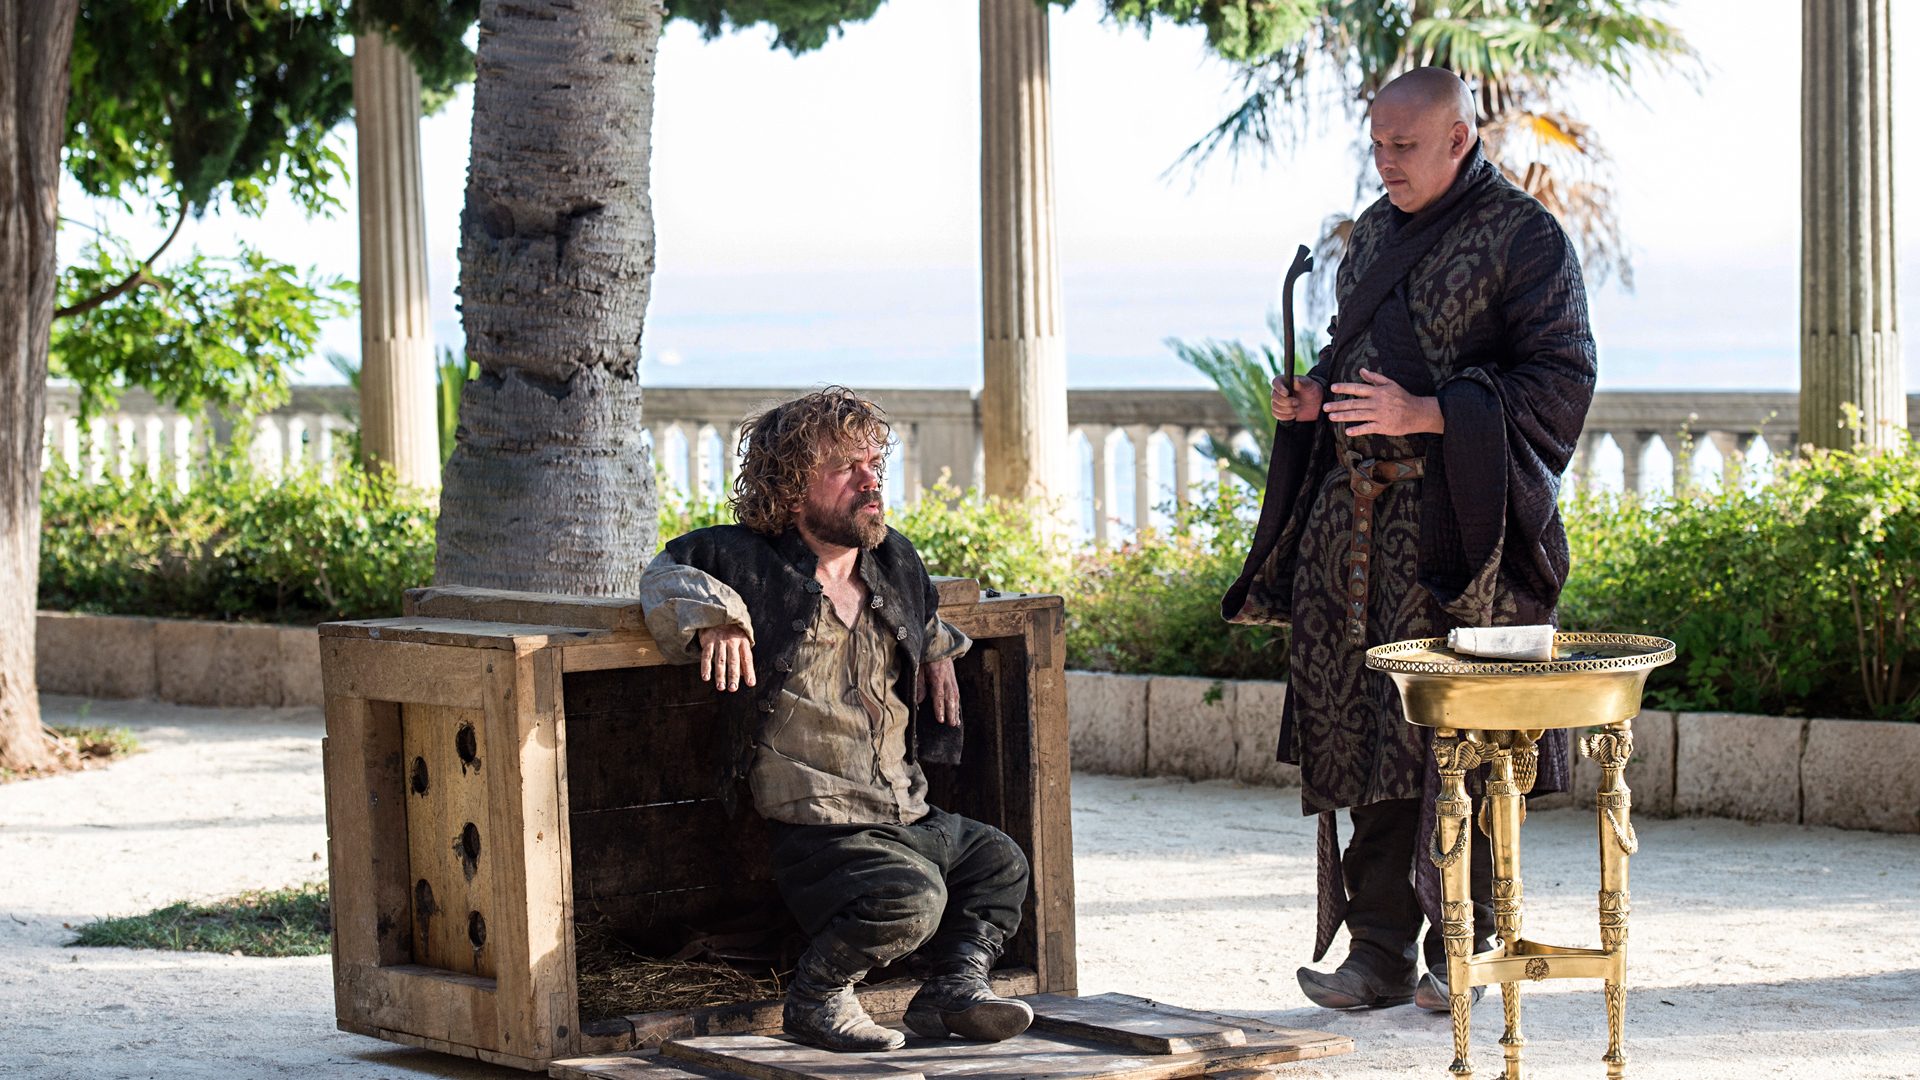 Conleth Hill Game Of Thrones Lord Varys Peter Dinklage Tyrion Lannister 1920x1080